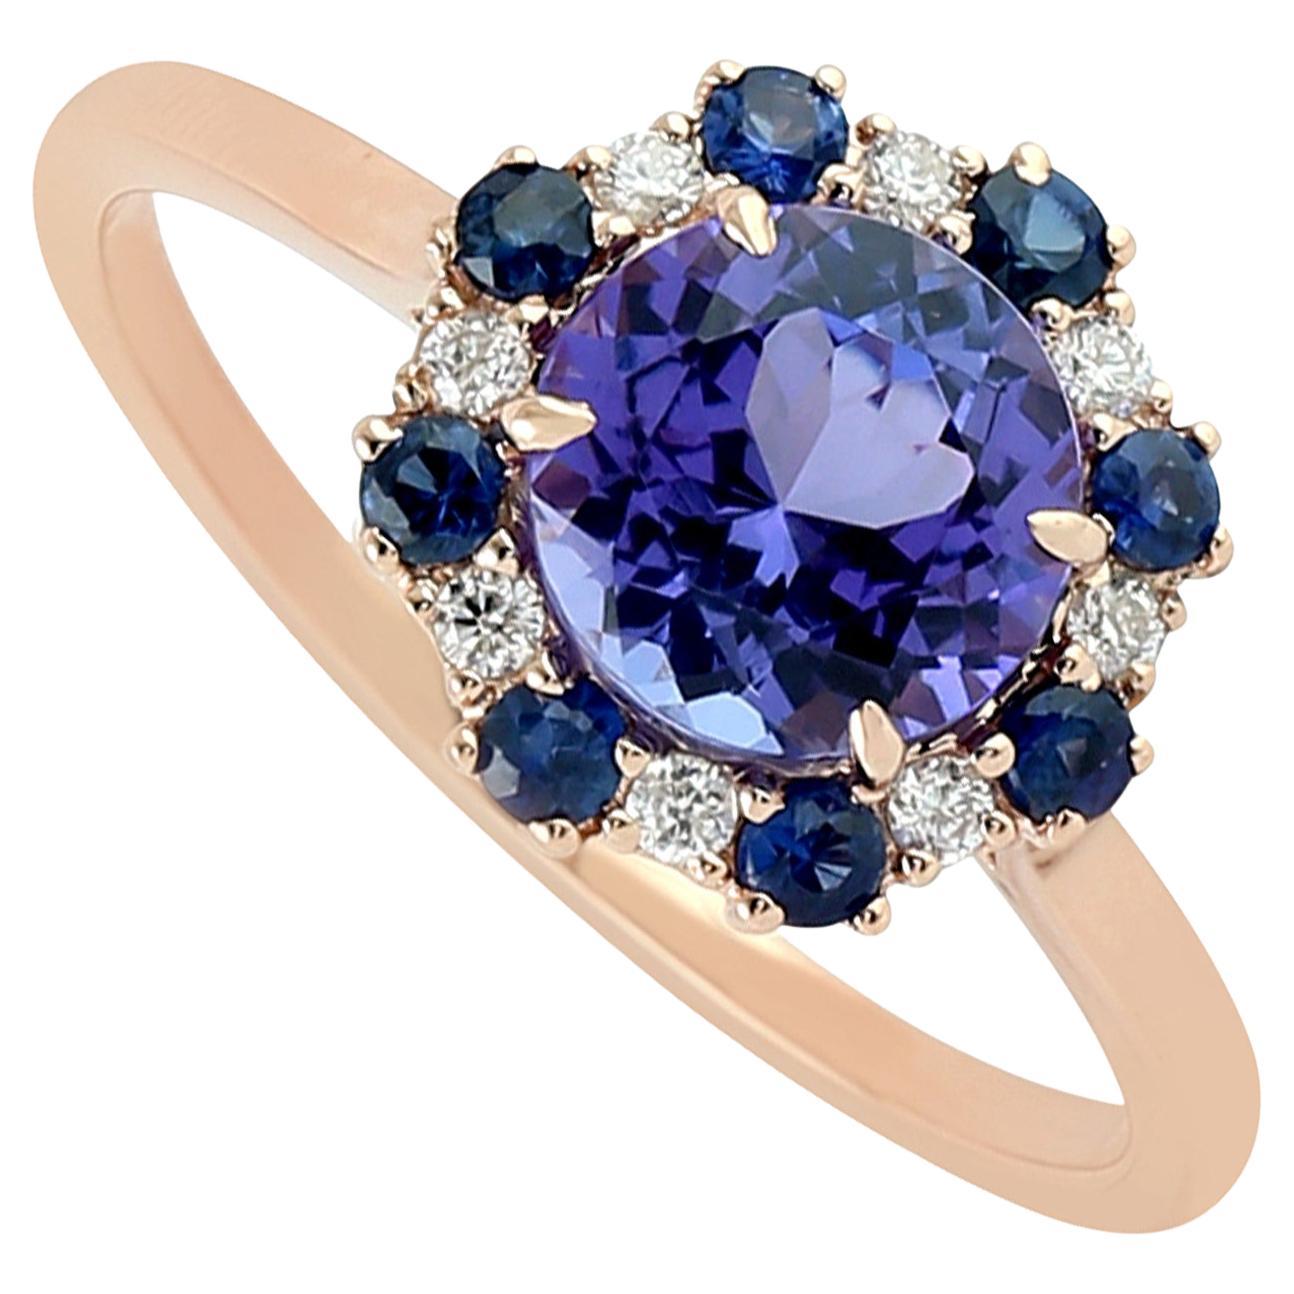 Tanzanite Cocktail Ring With Blue Sapphire & Diamonds Made In 18k Rose Gold For Sale